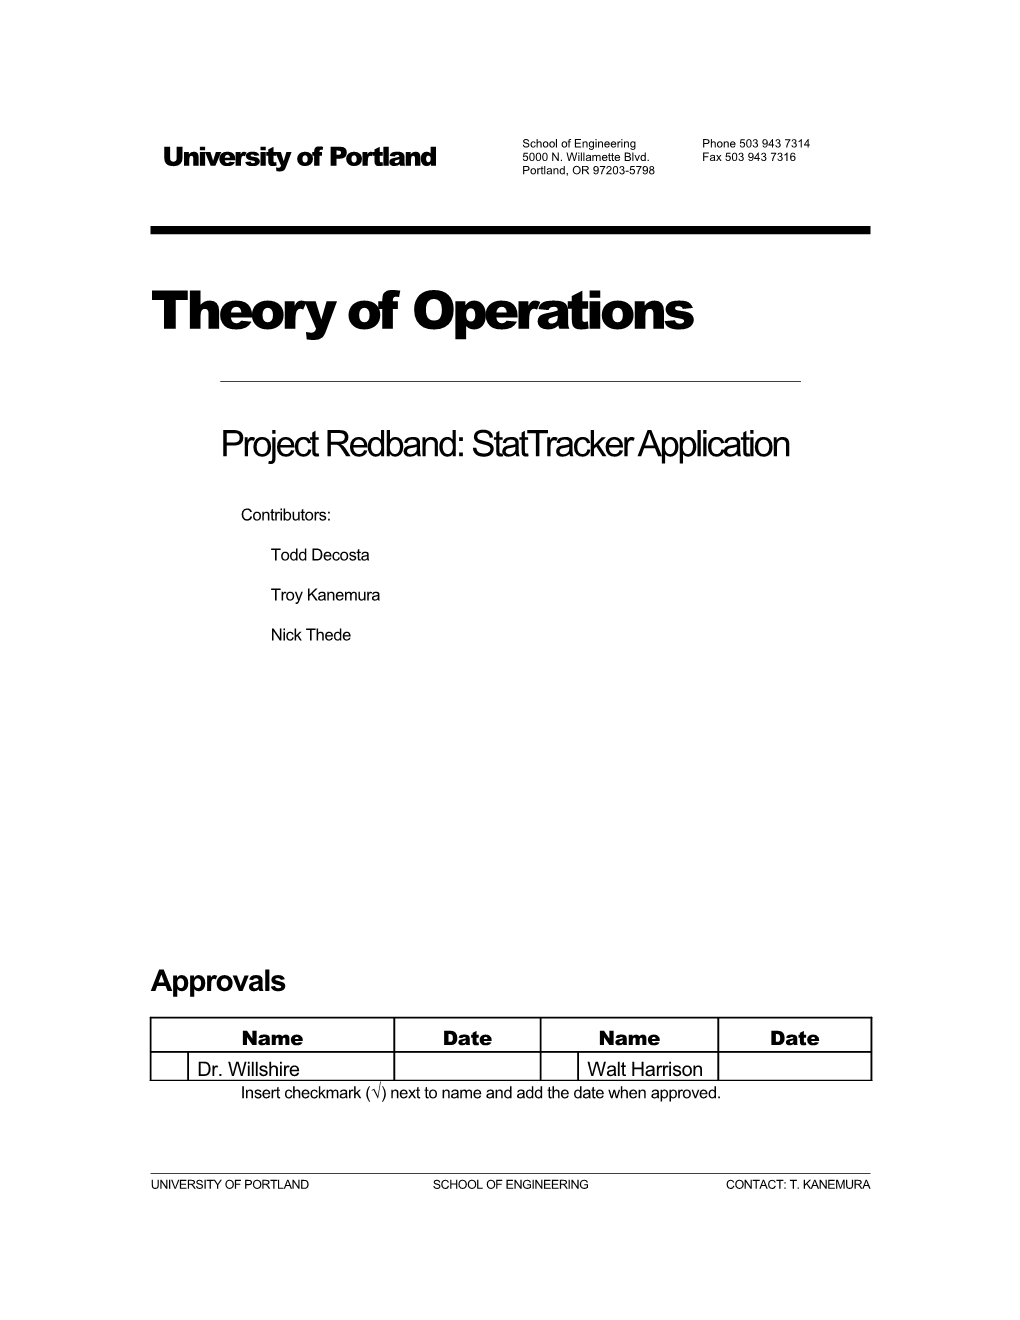 Theory of Operations